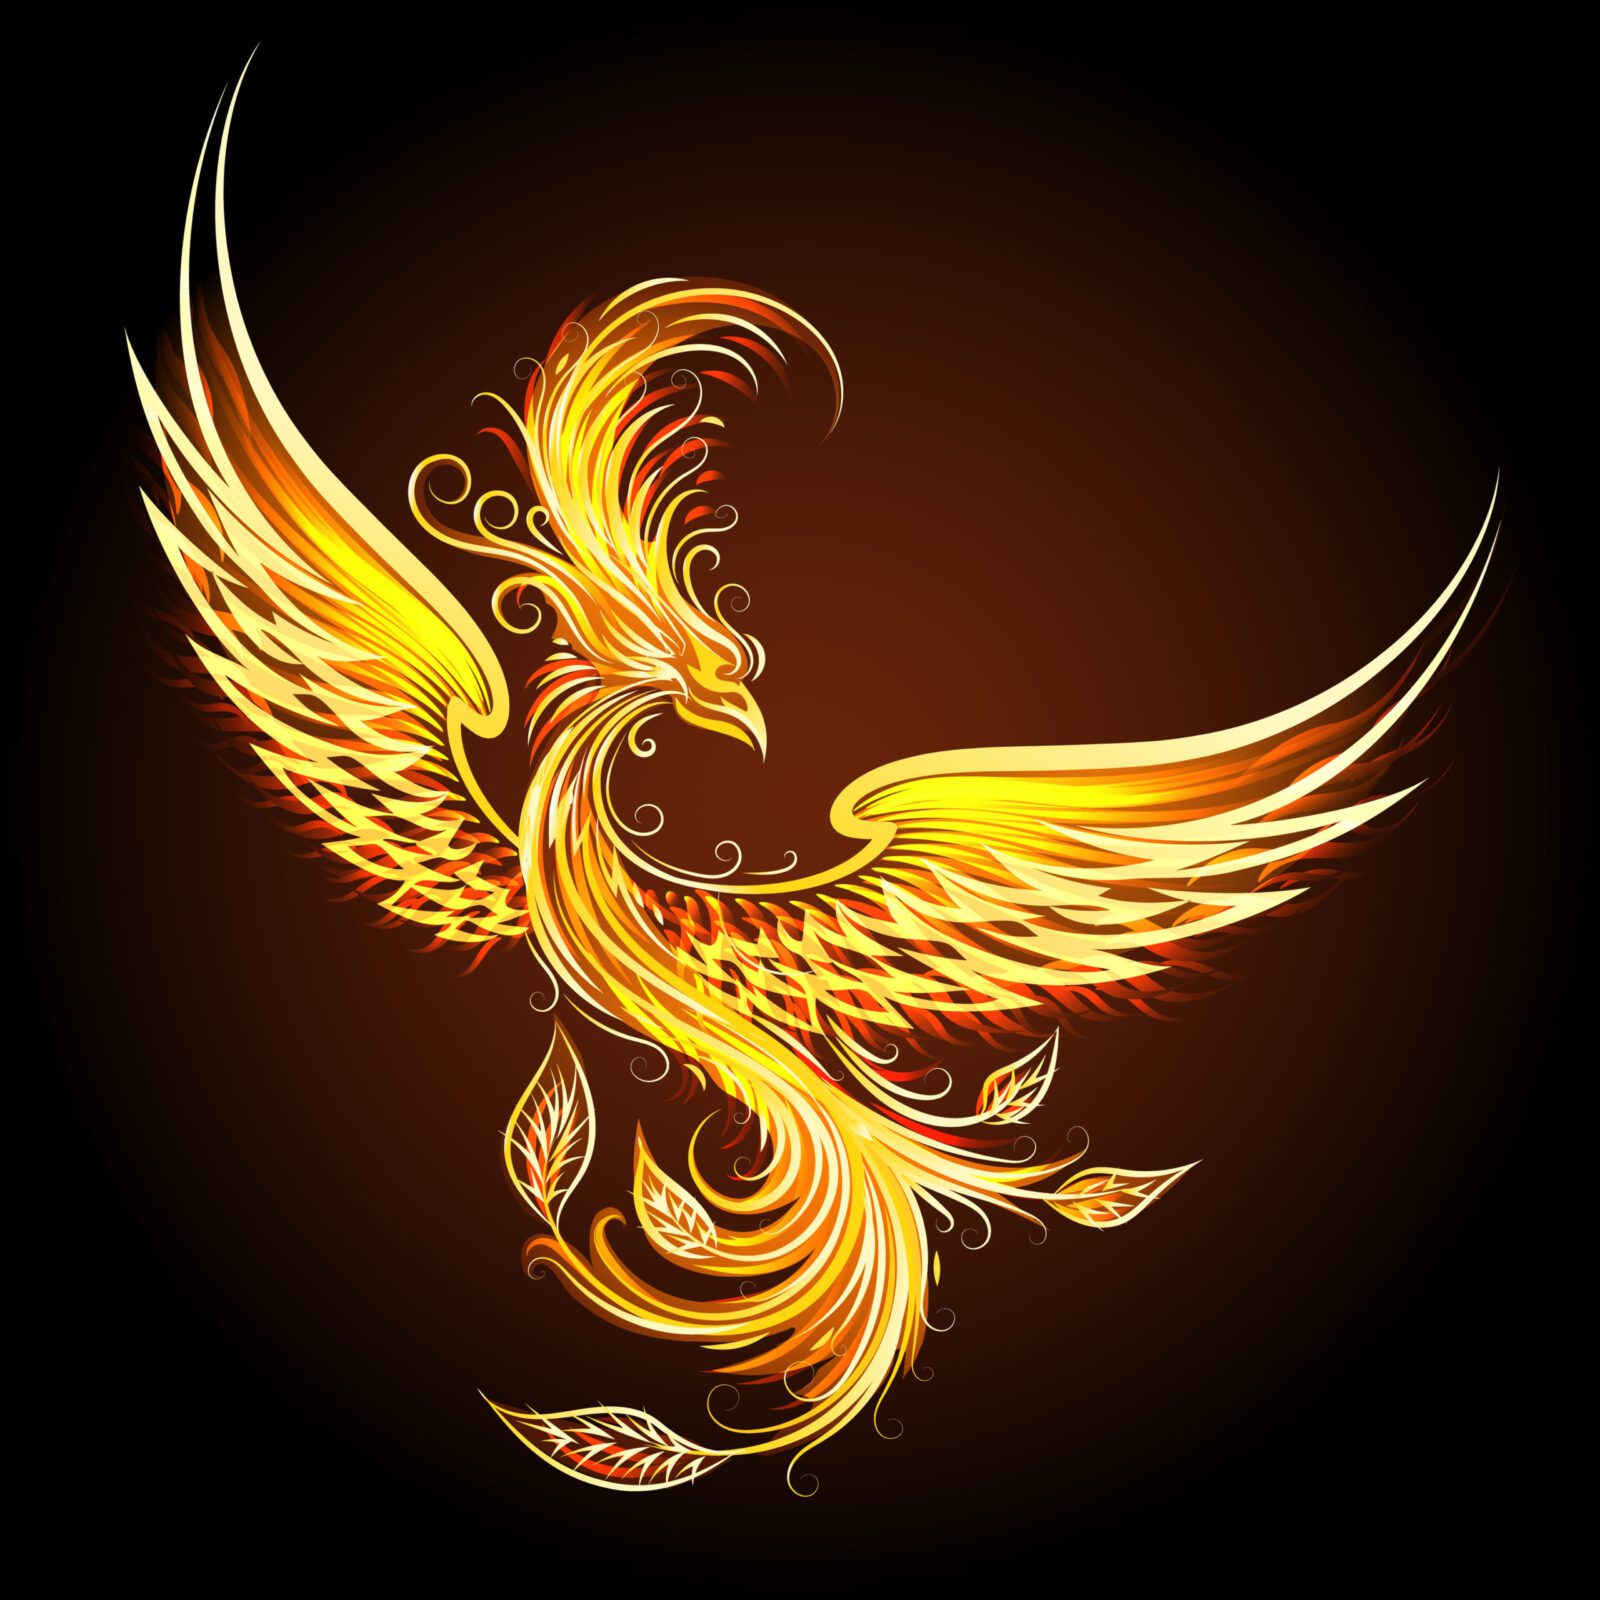 On Phoenixes (Plus Some Other Flaming Things)